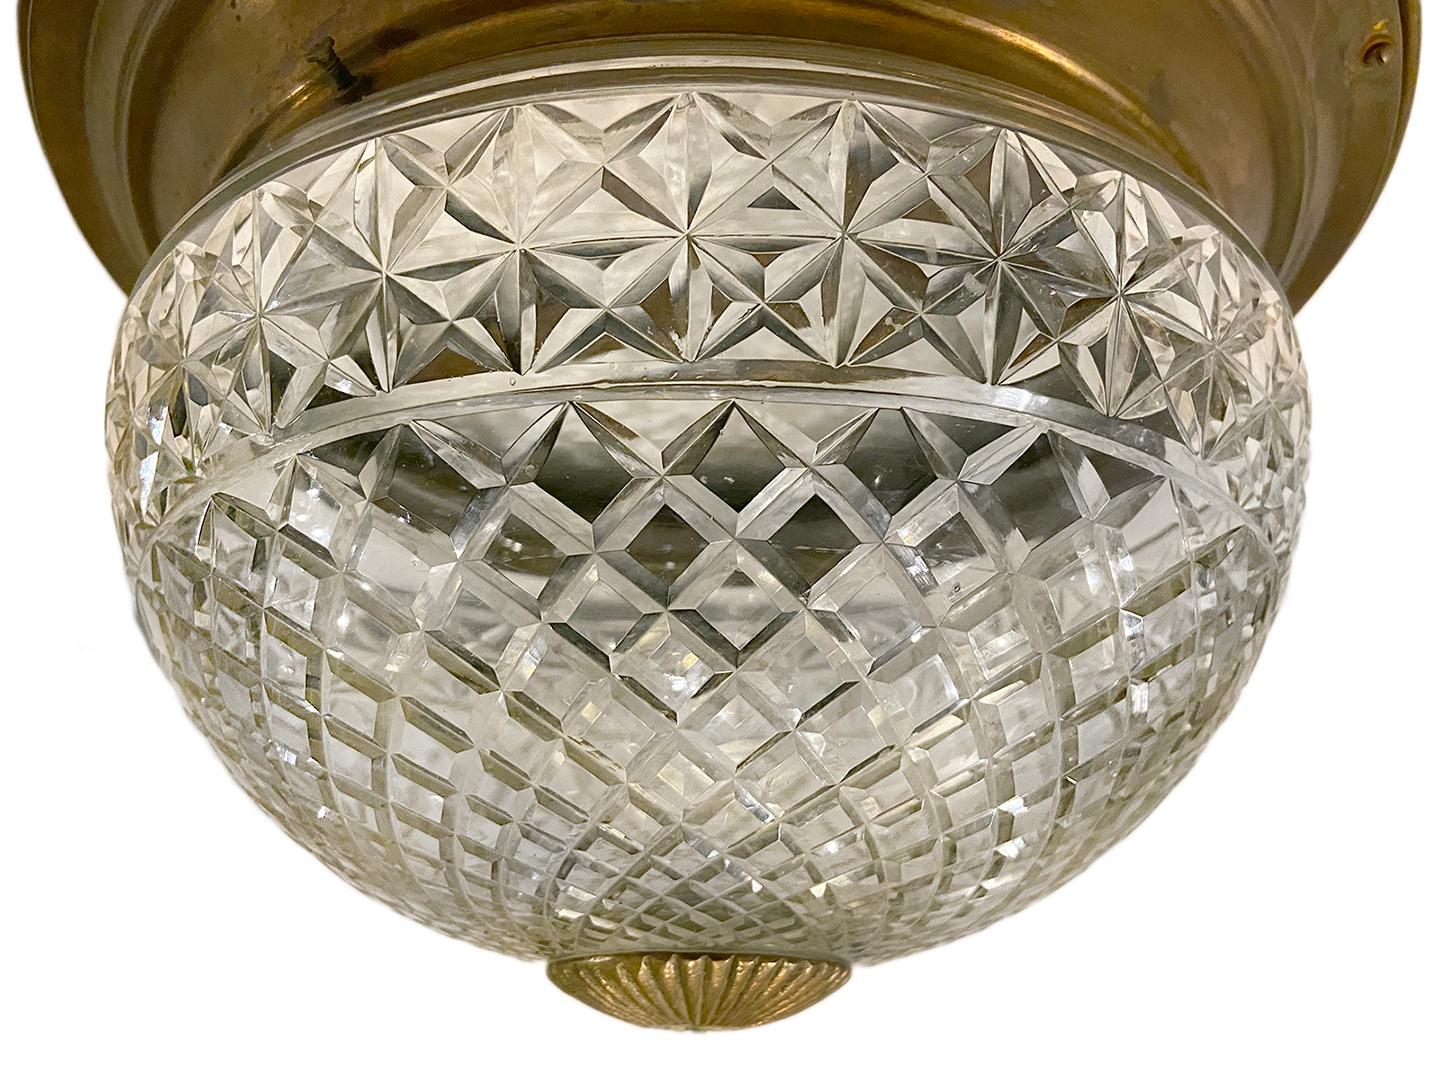 A circa 1920s English cut crystal flush mounted light fixture with interior lights.

Measurements:
Diameter 14